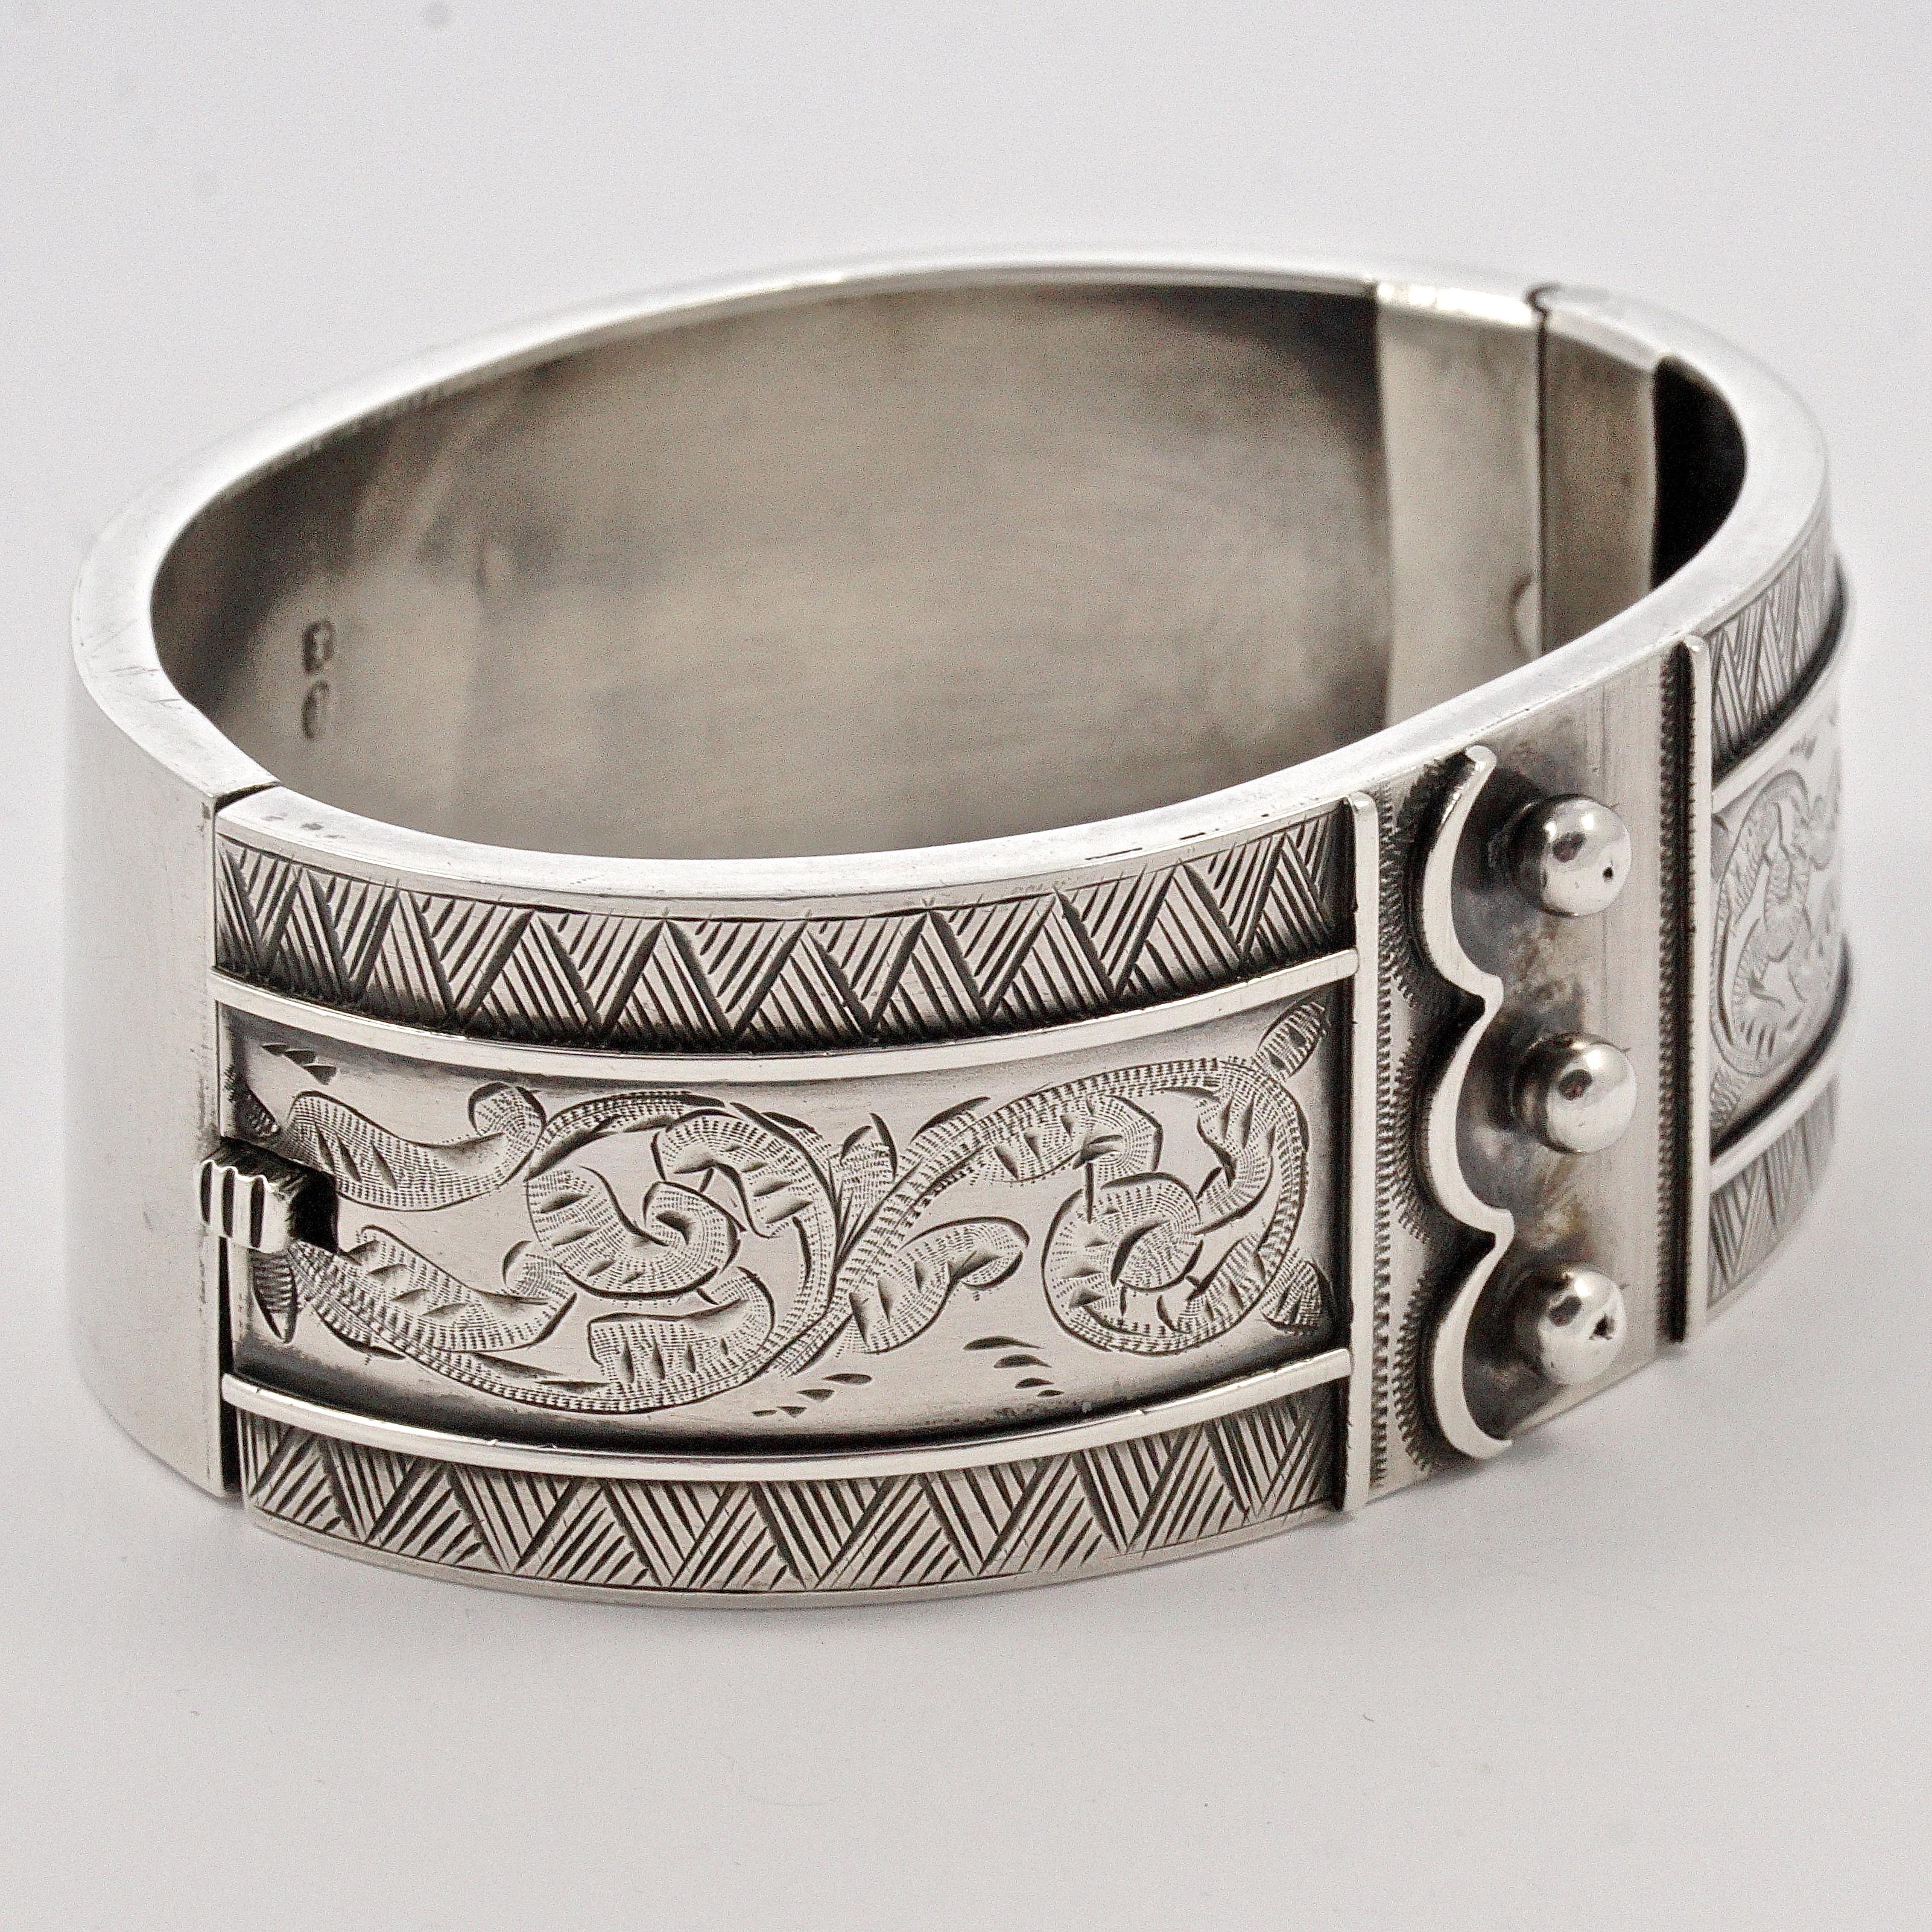 
Beautiful sterling silver triple button cuff hand engraved bangle, with a scroll and geometric pattern. It is slightly oval, the inside measurements are 6.1cm / 2.4 inches by 4.5cm / 1.77 inches, and the width is 2.5cm / .98 inch. The bracelet is